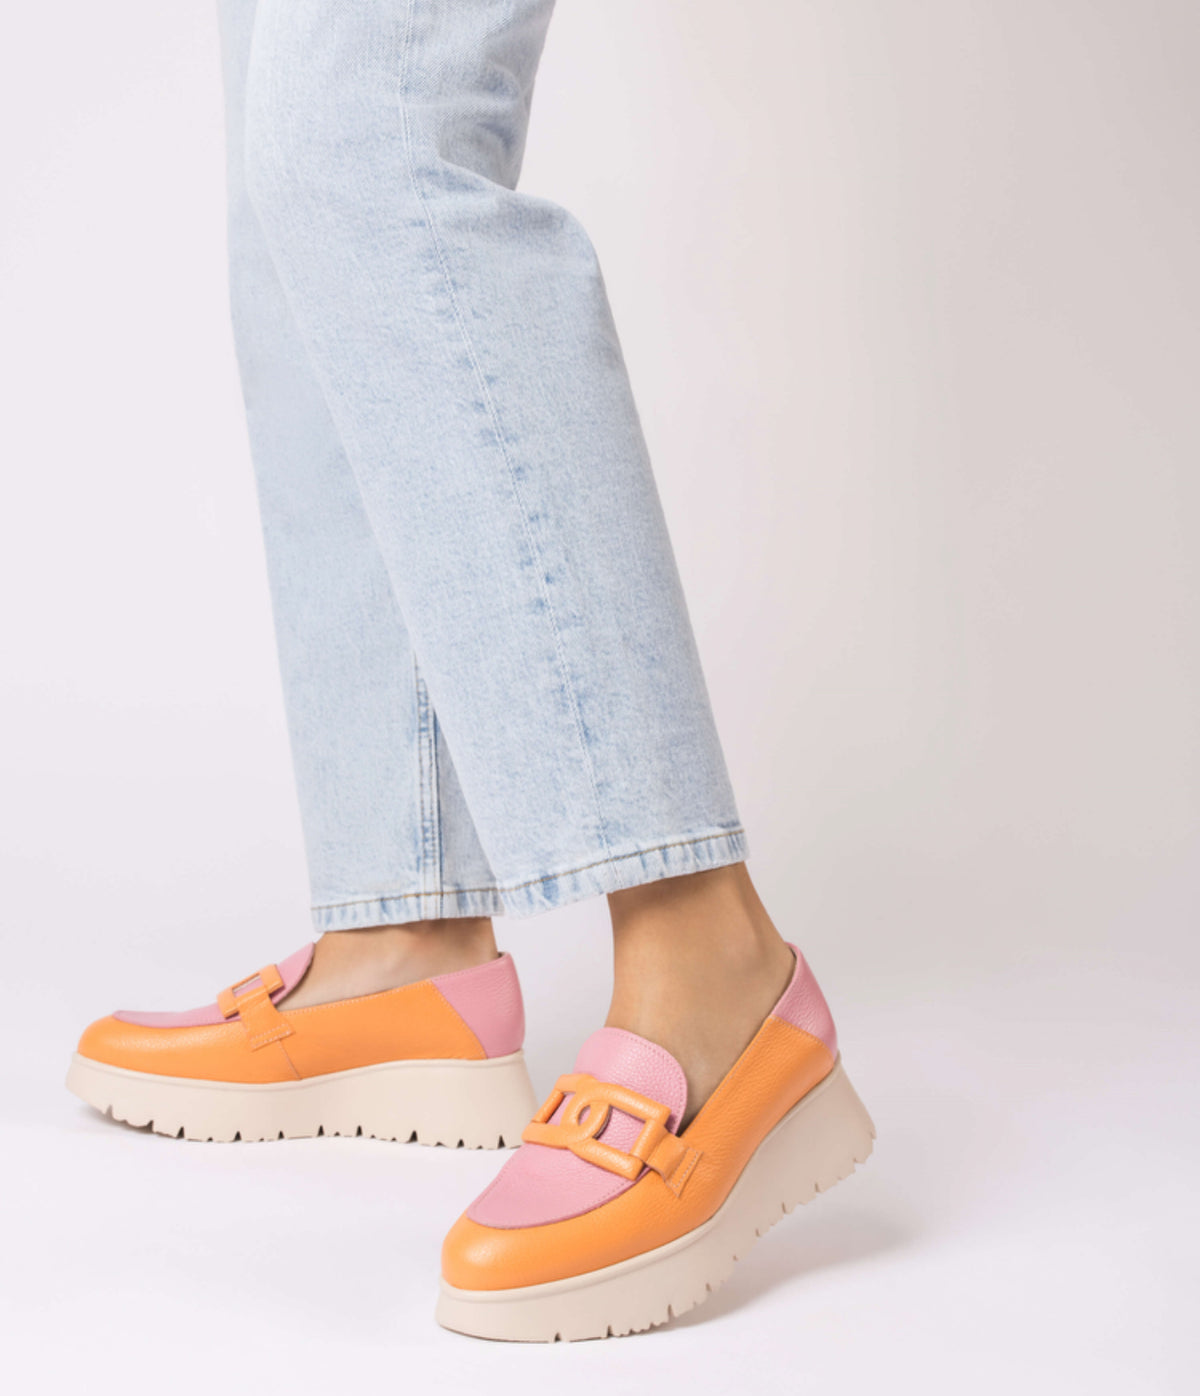 Wonders - C-7301 Pink and Apricot Wedge Loafer